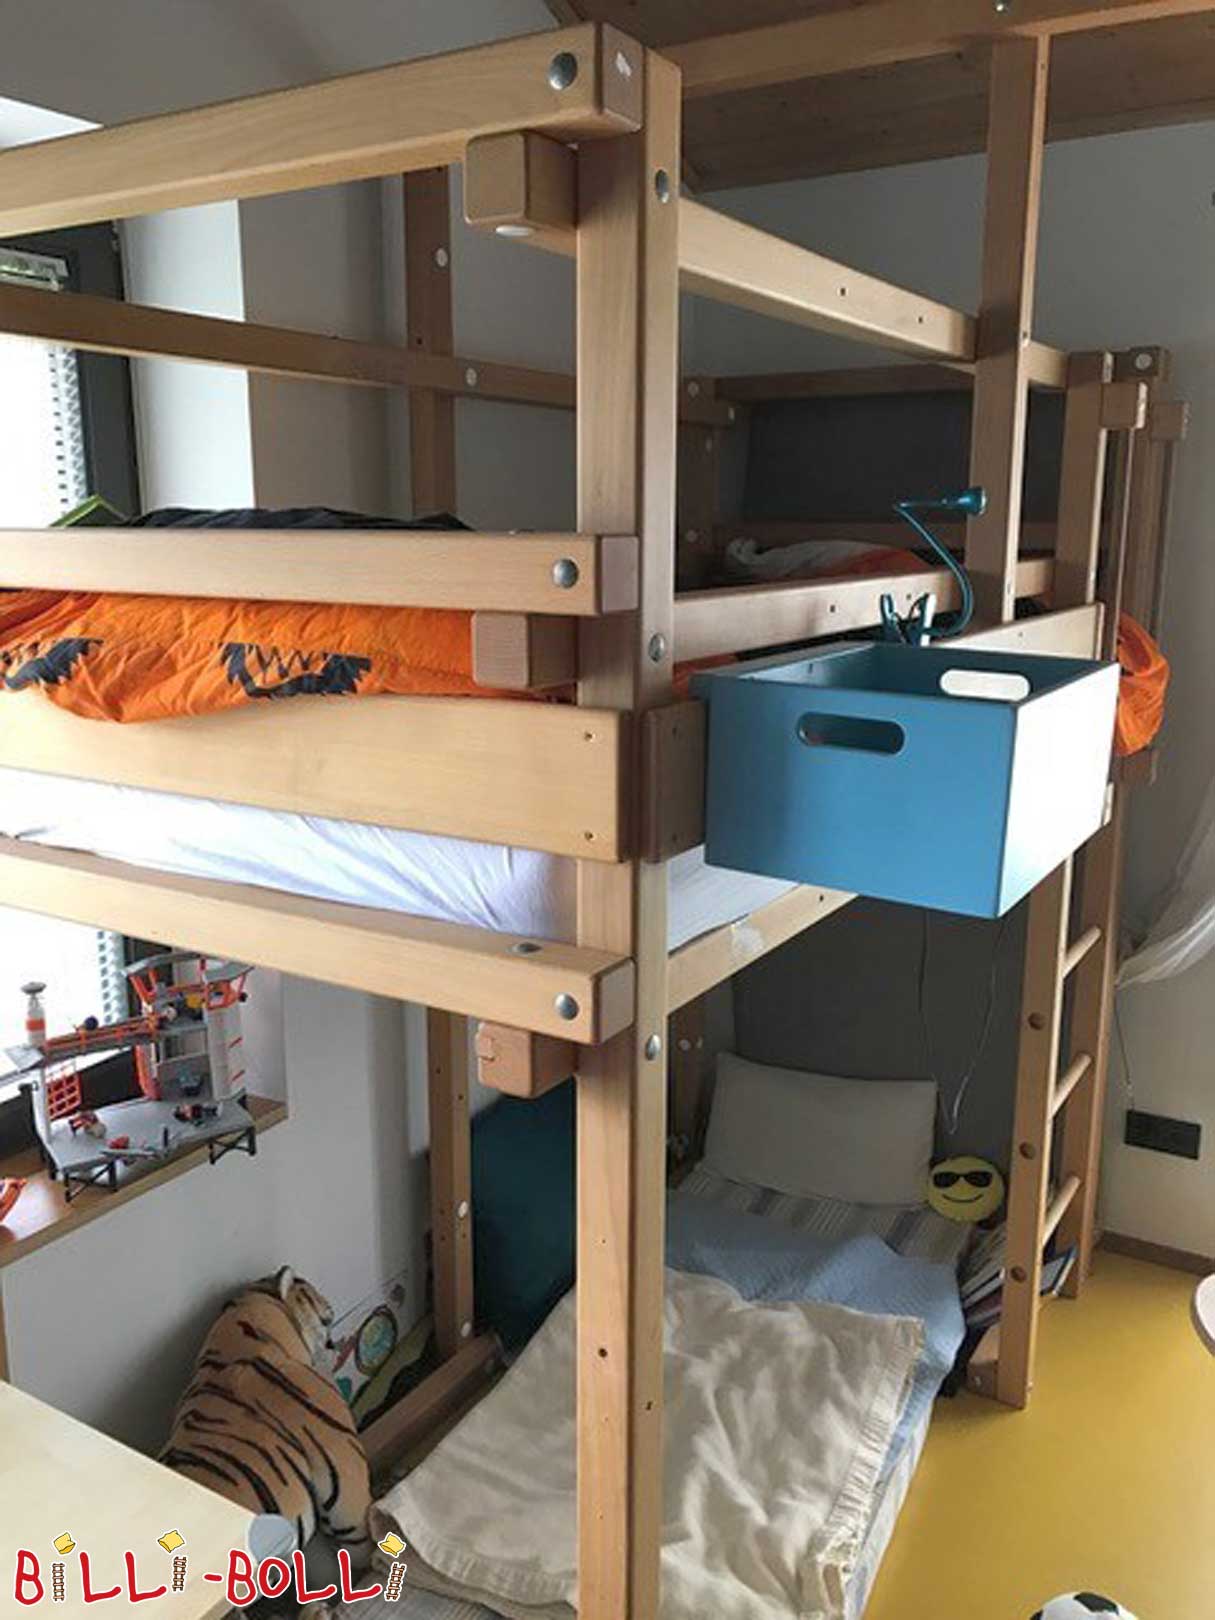 Loft bed growing with the child, 90 x 200 cm, oiled-waxed beech (Category: second hand loft bed)